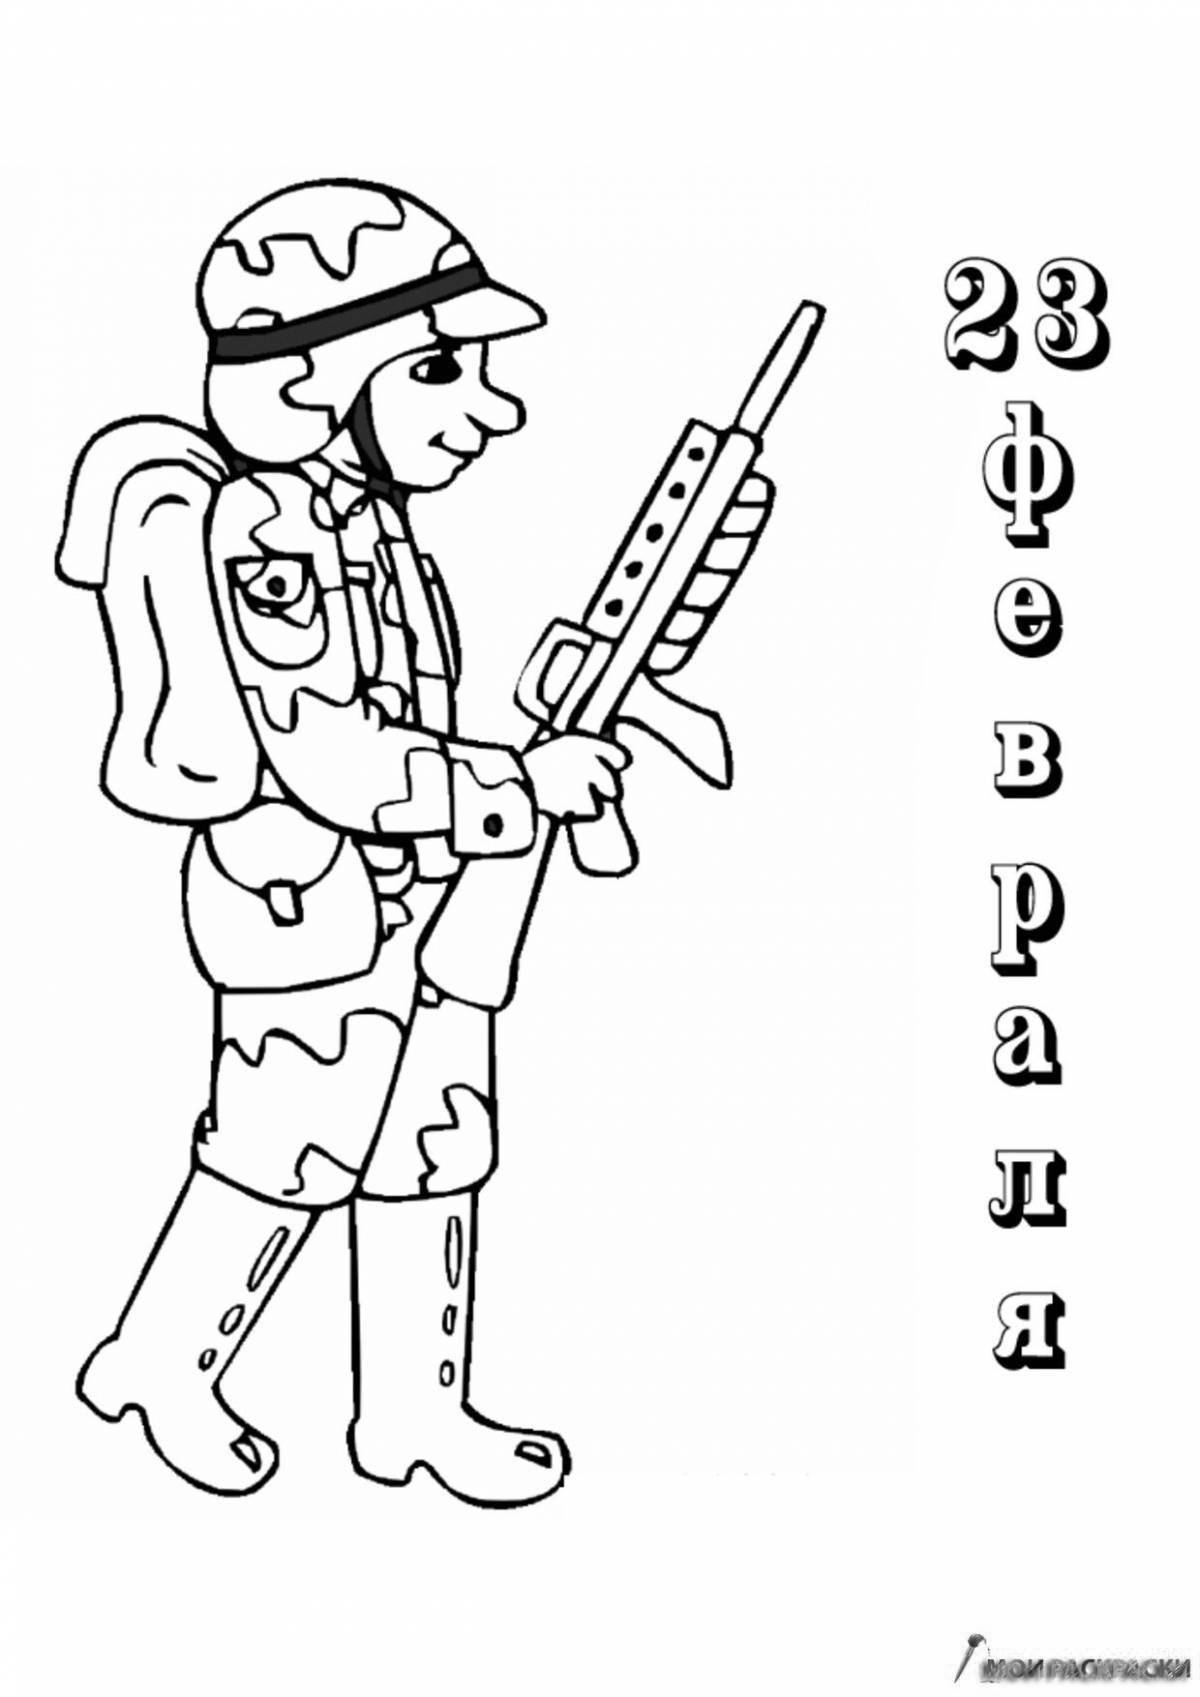 A fascinating coloring book about the military profession for kids